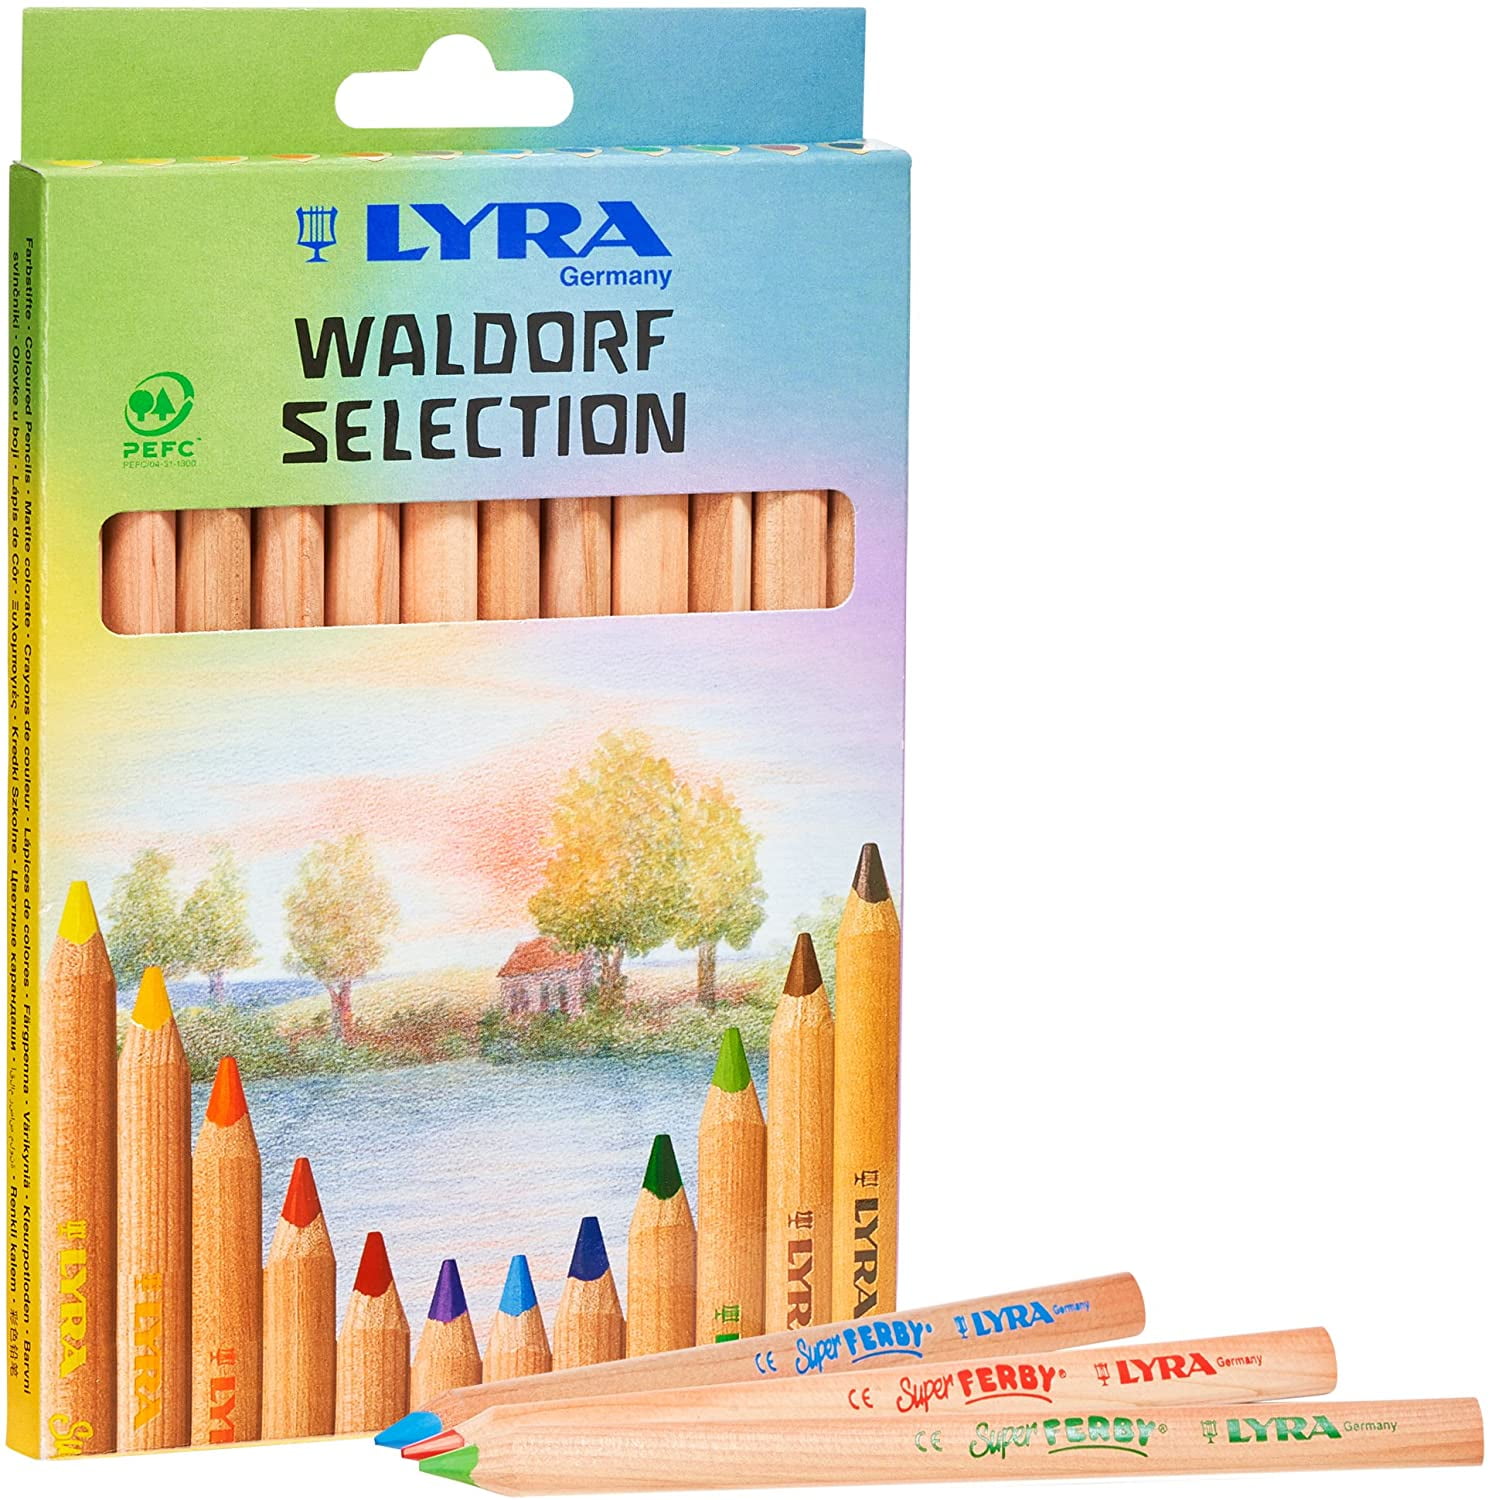 3721122 Assorted Metallic Colors 6.25mm Lead Core Set of 12 Pencils LYRA Super Ferby Giant Triangular Colored Pencil Lacquered 